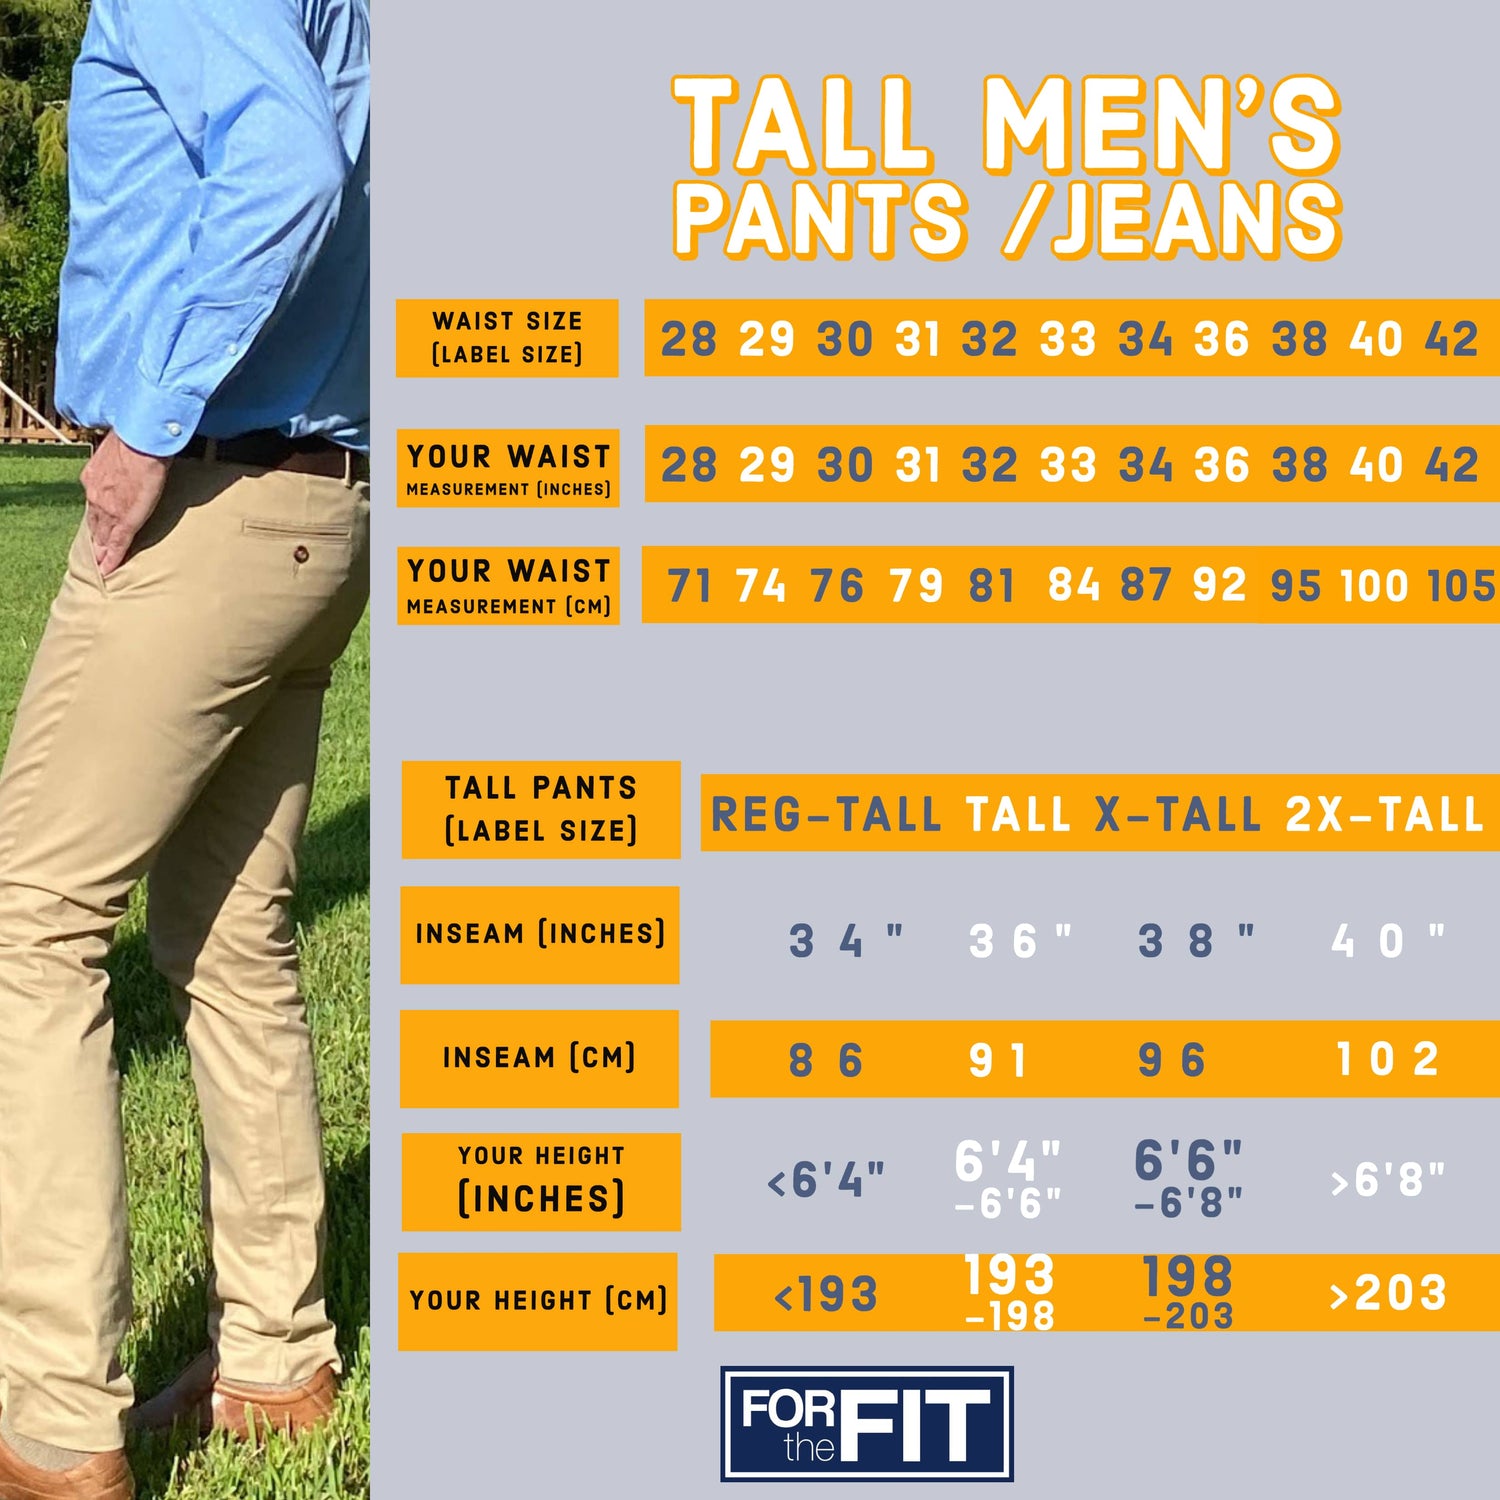 Men's Pant Sizes: Complete Guide